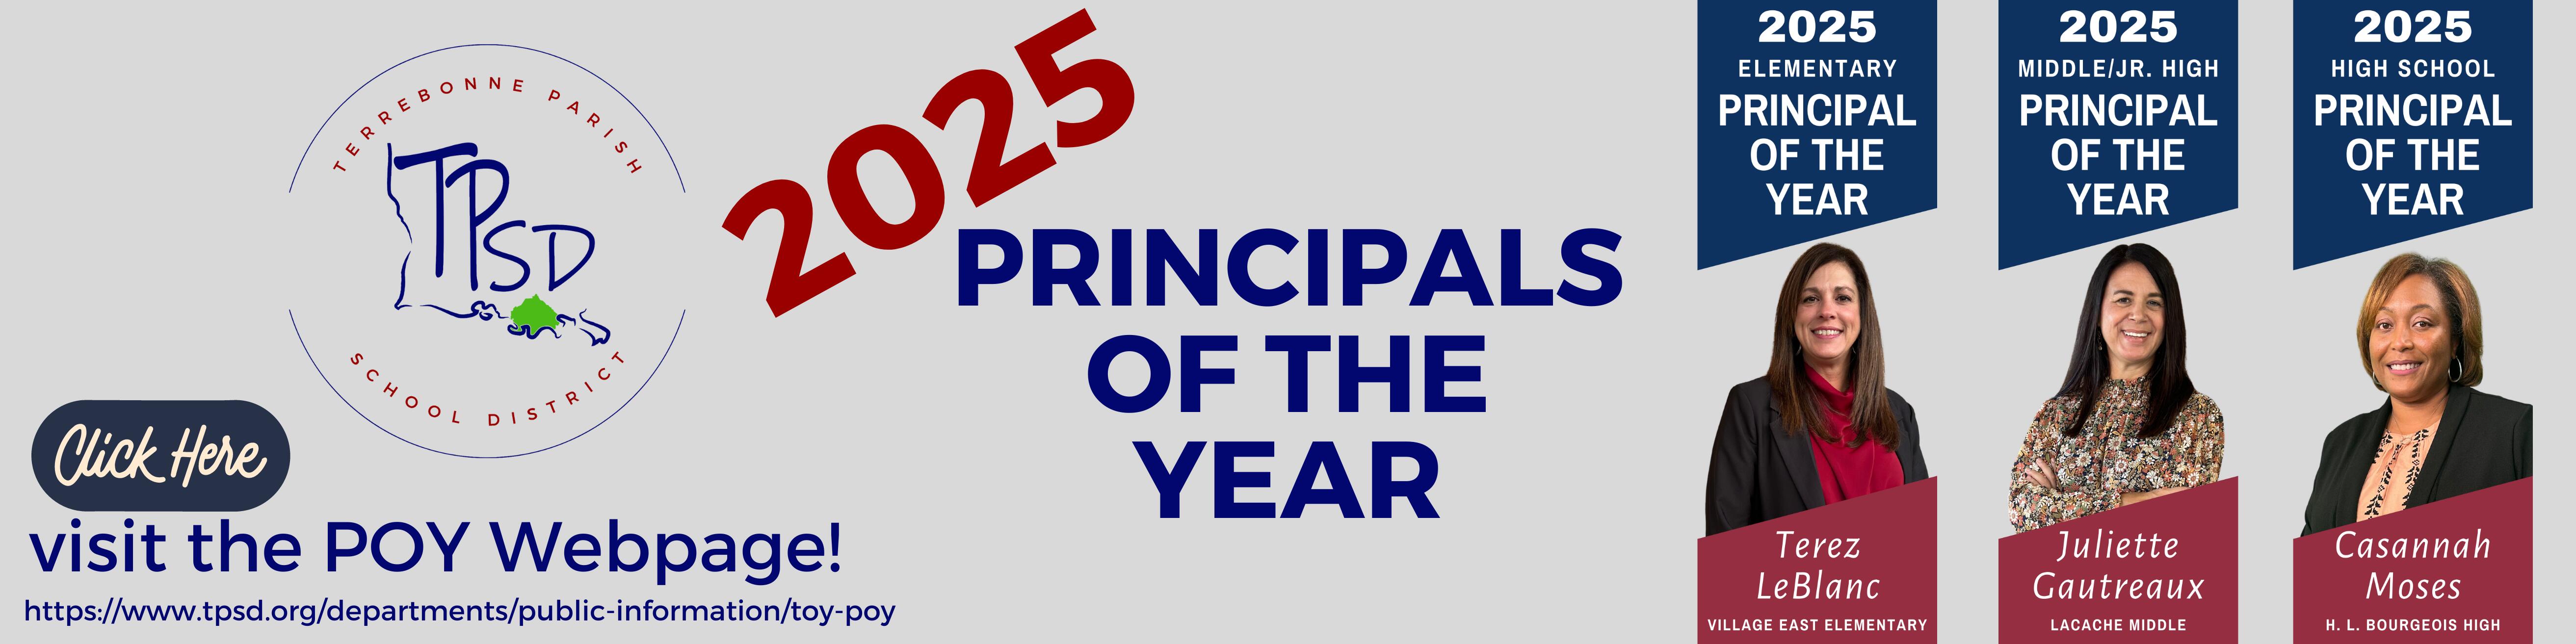 2025 District Principals of the Year